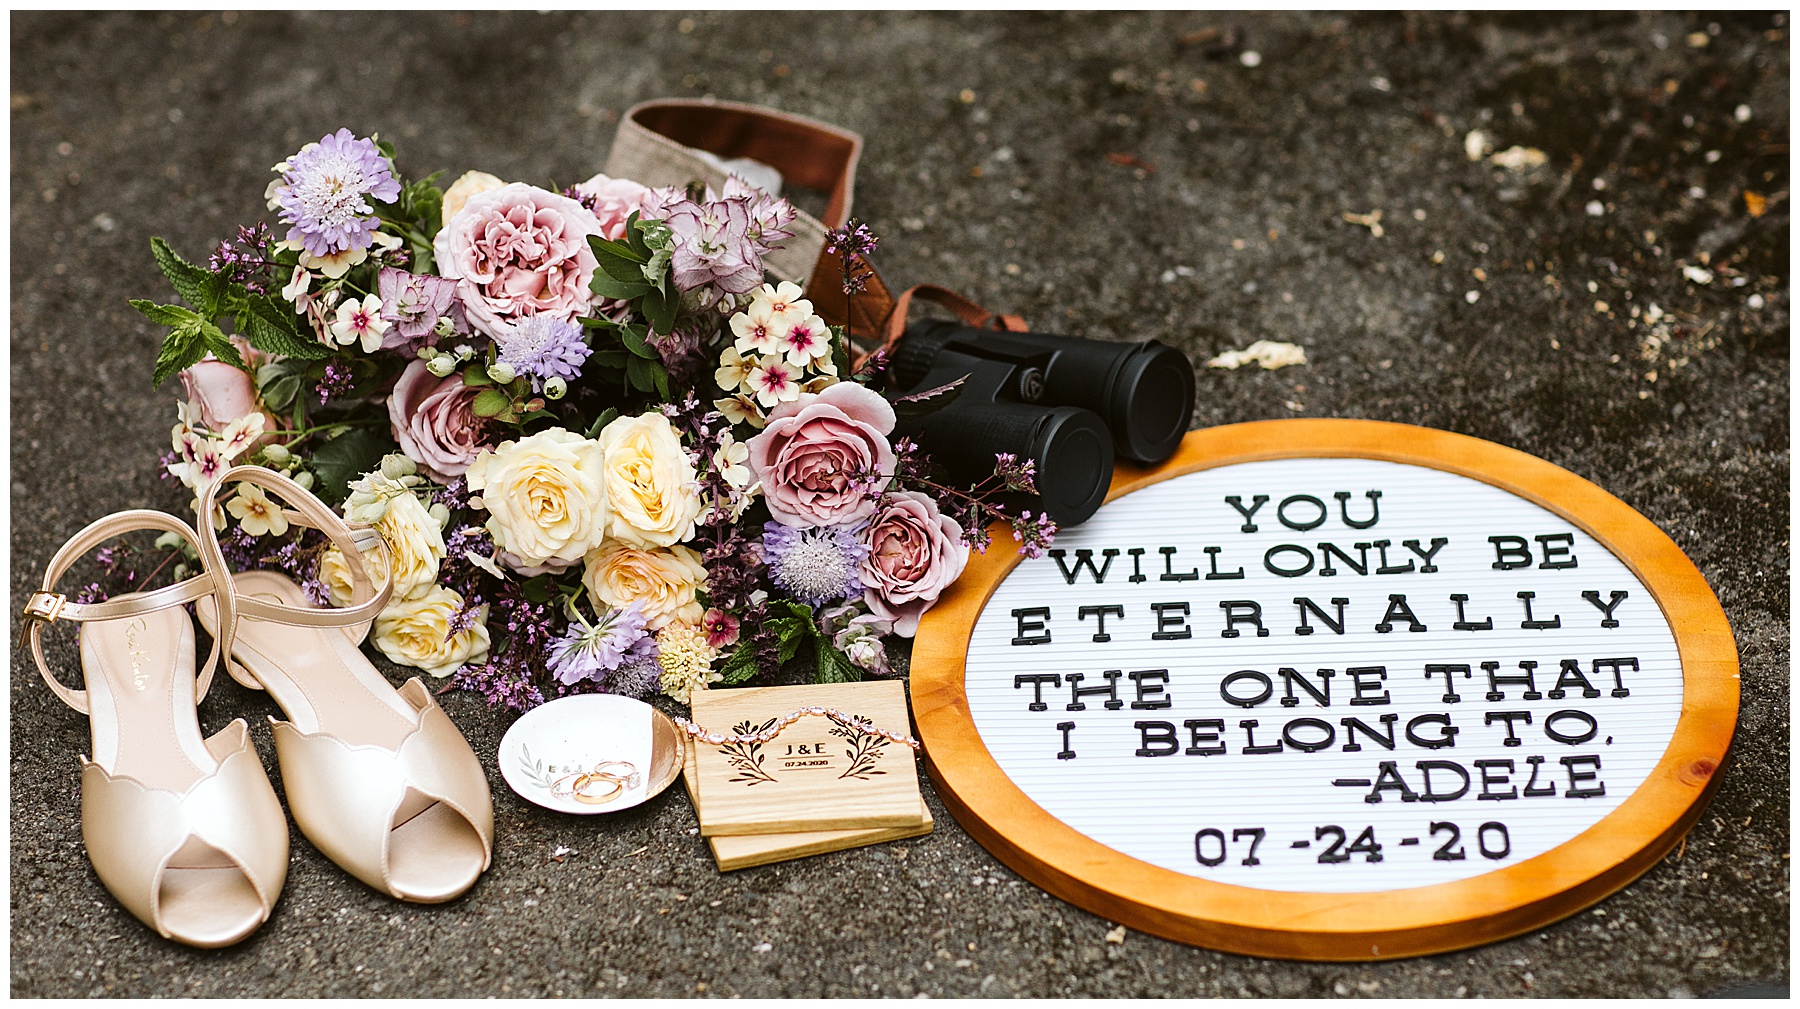 mount rainier elopement details, including bride's shoes, rings, letterboard sign, florals, and binoculars. 